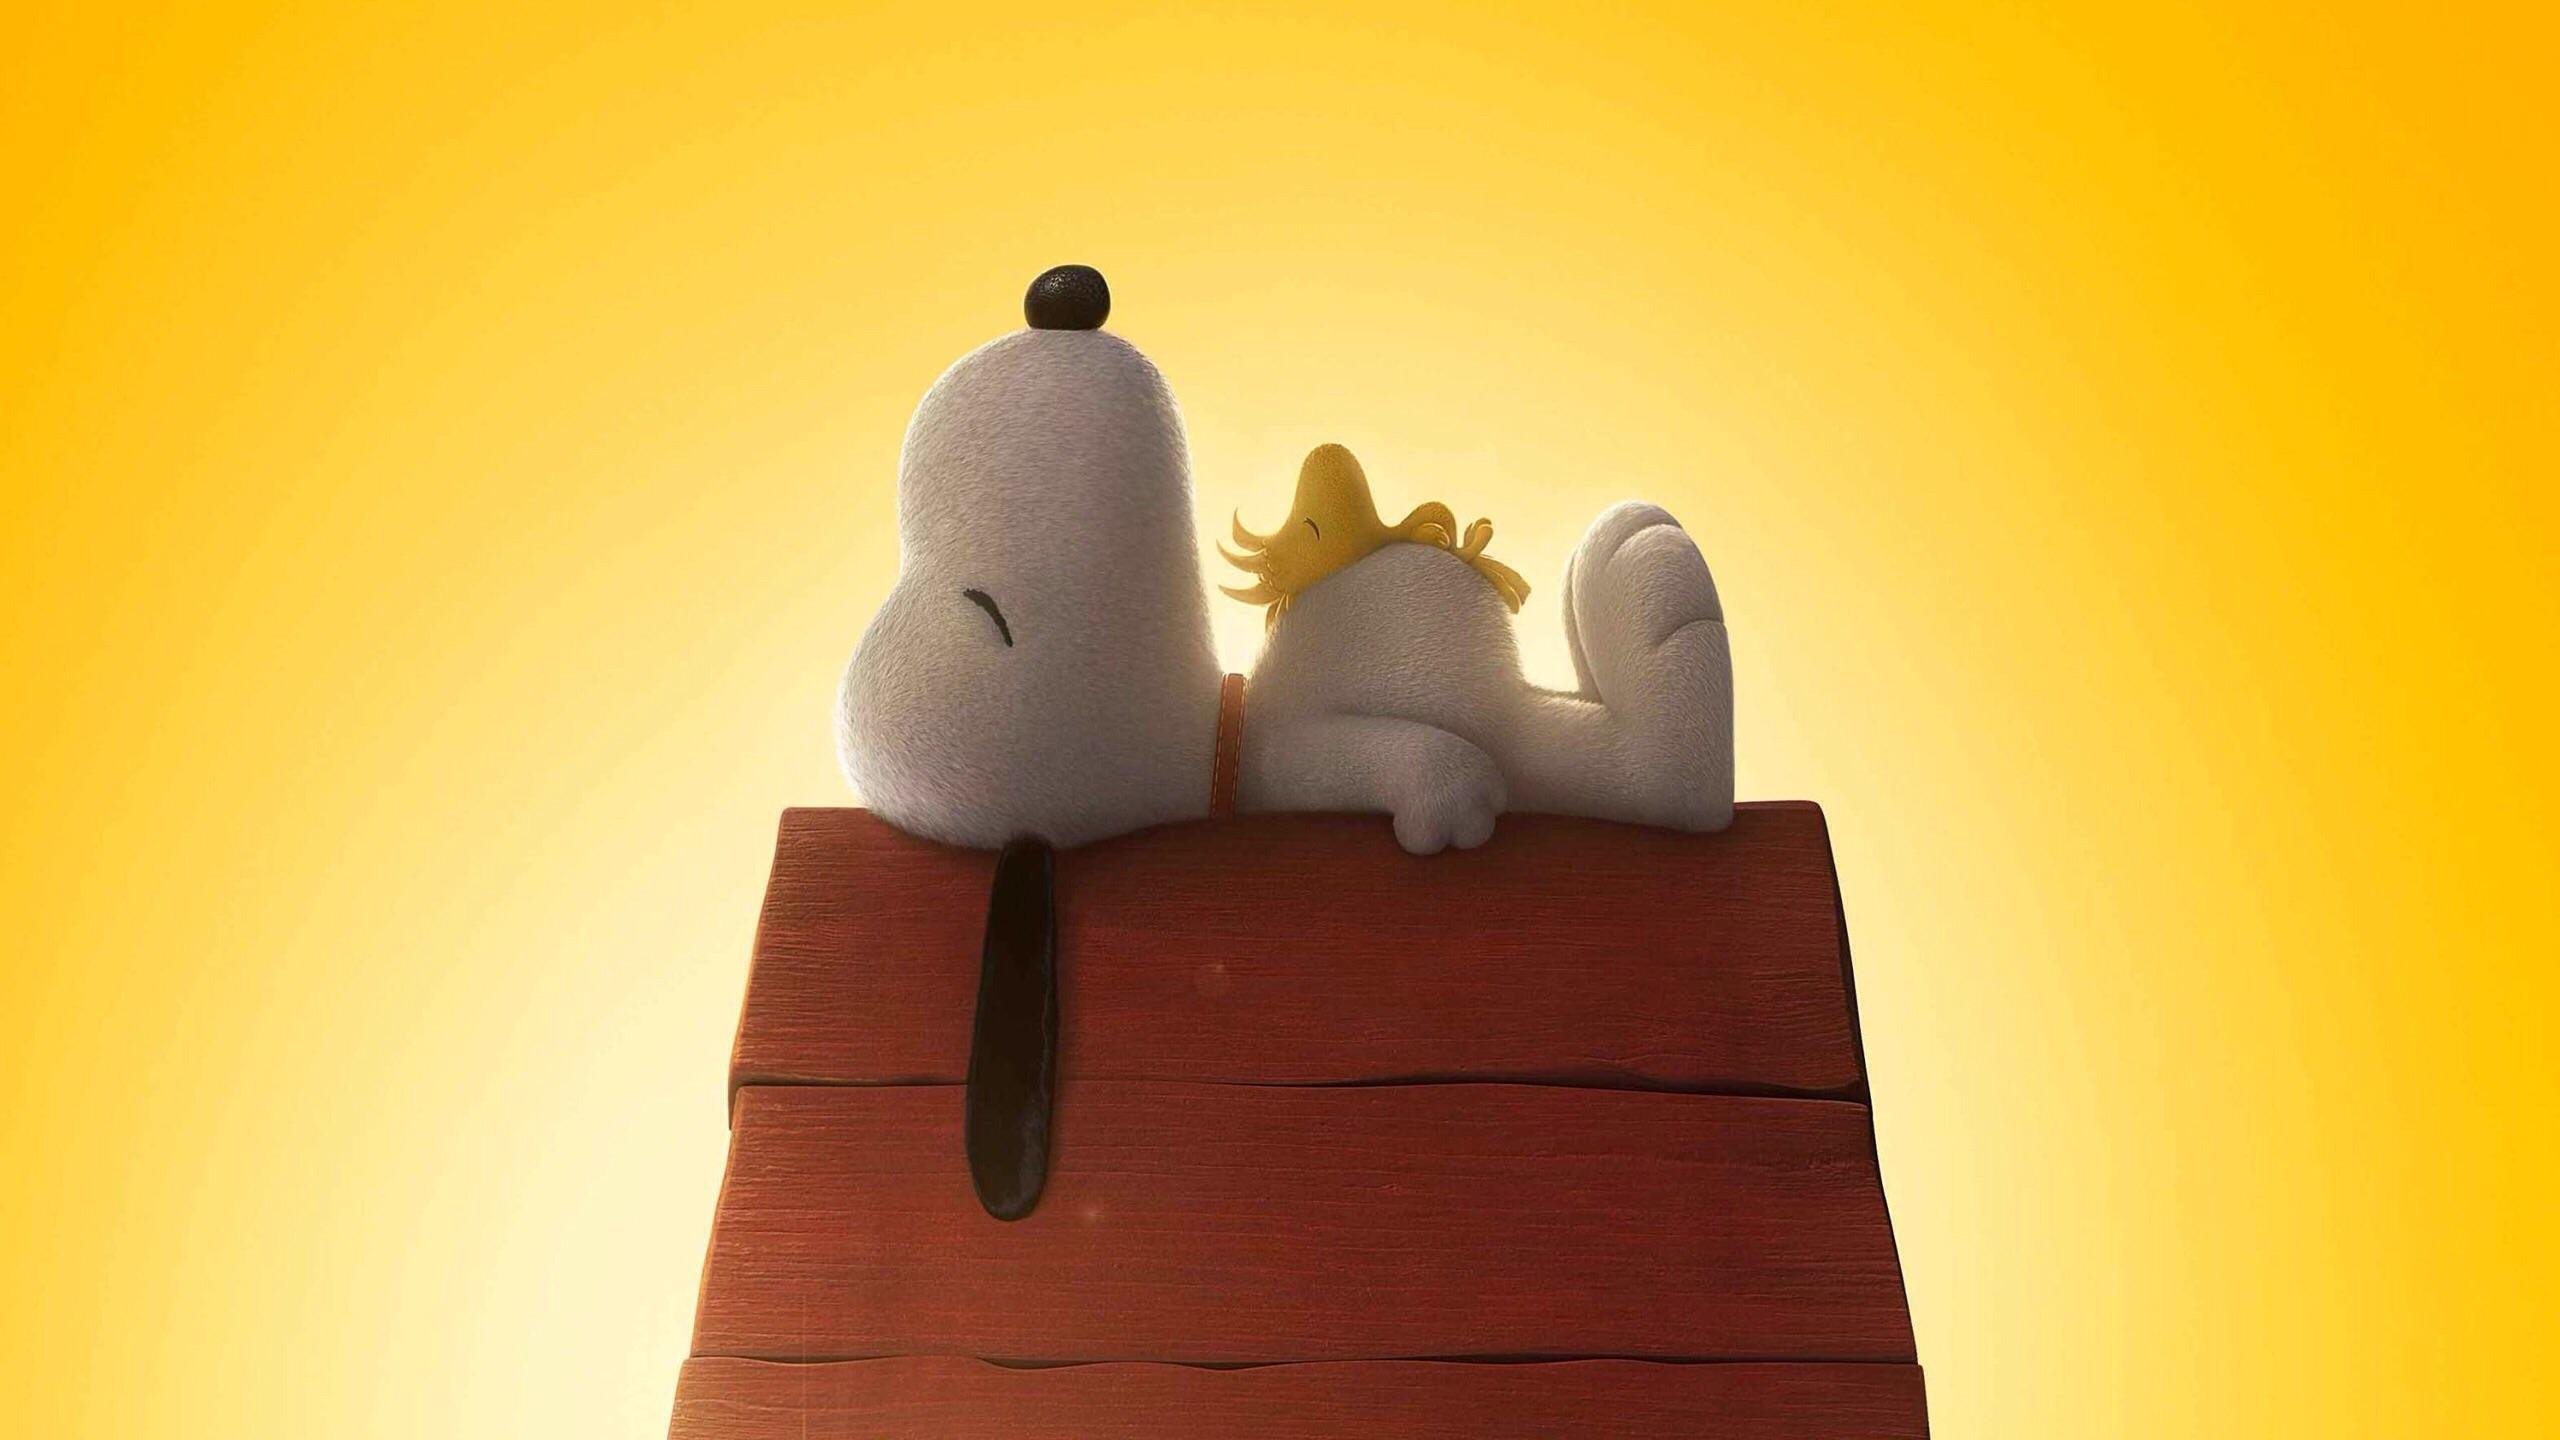 snoopy 4K wallpapers for your desktop